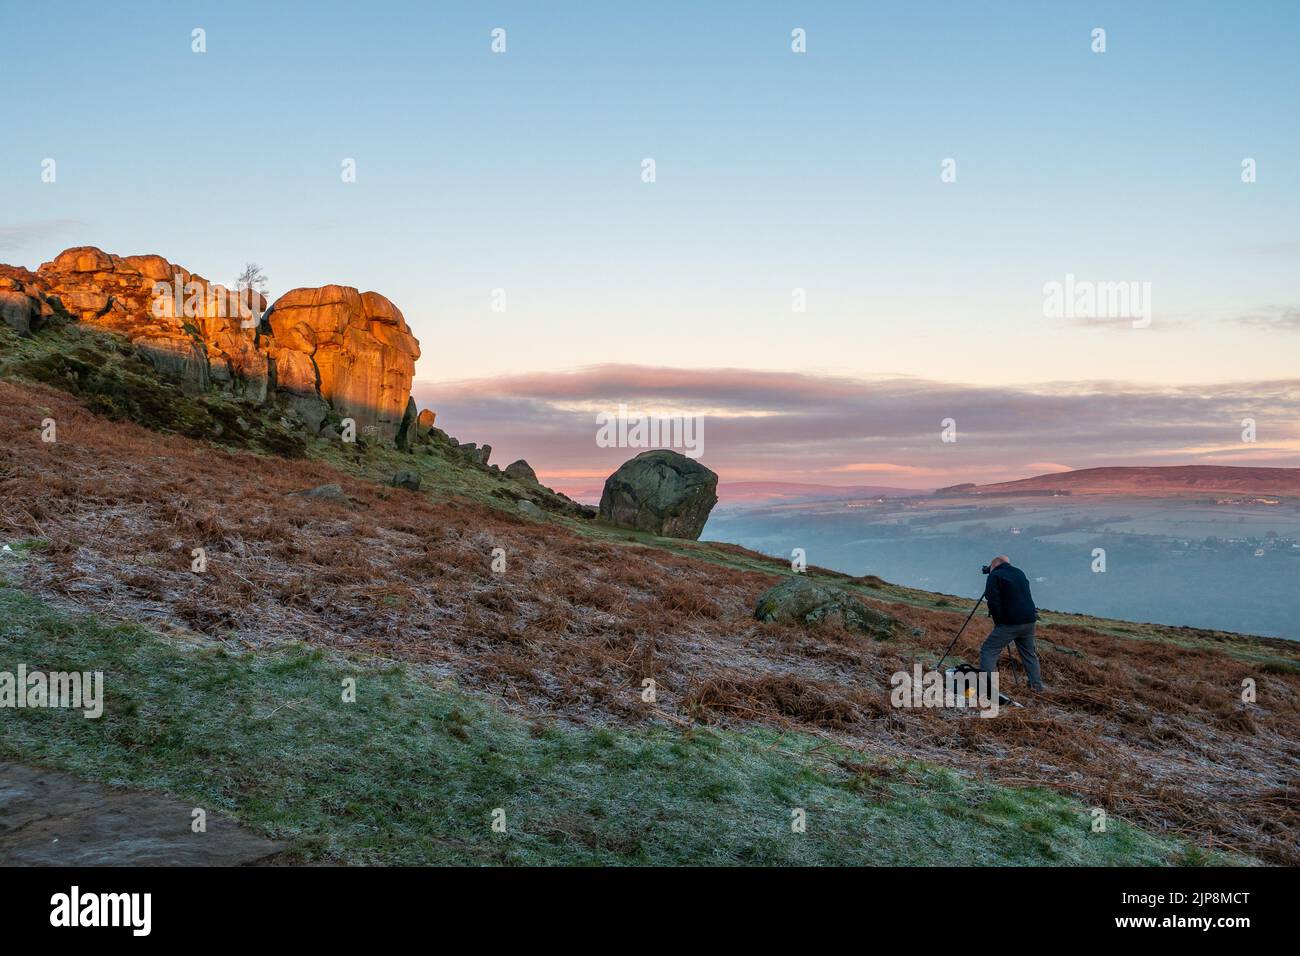 Photographer taking photos with a camera and tripod photographing sunrise at the Cow and Calf Rocks, Ilkley Moor, England. Stock Photo